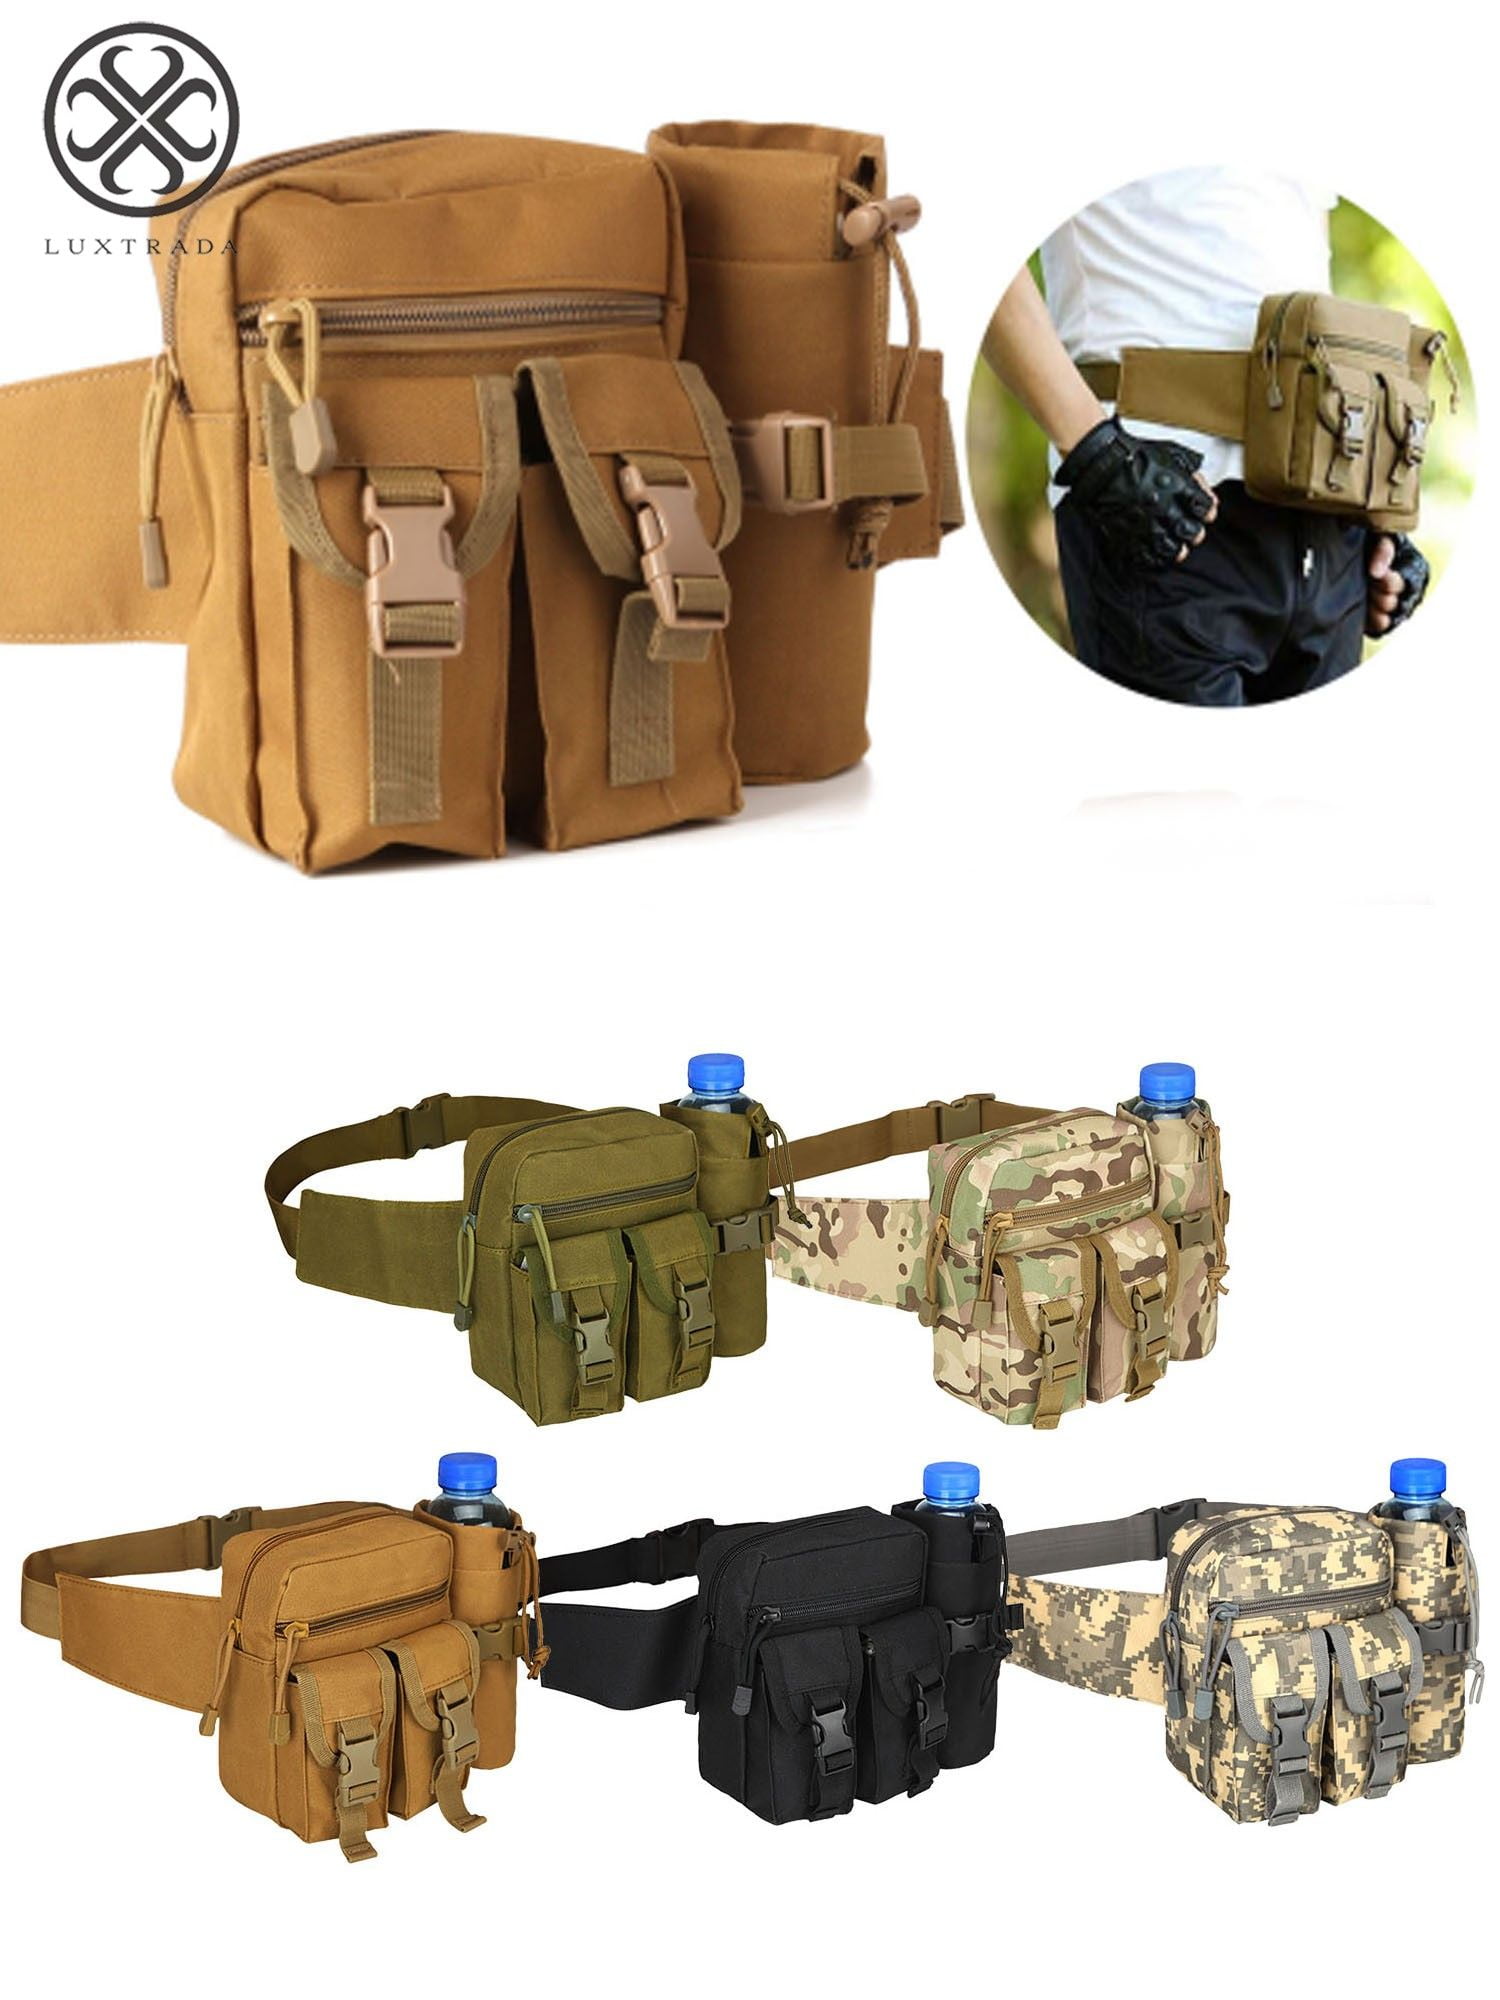 Outdoor Waterproof Tactical Military Waist Bag Pack Camping Hiking Phone Pouch 